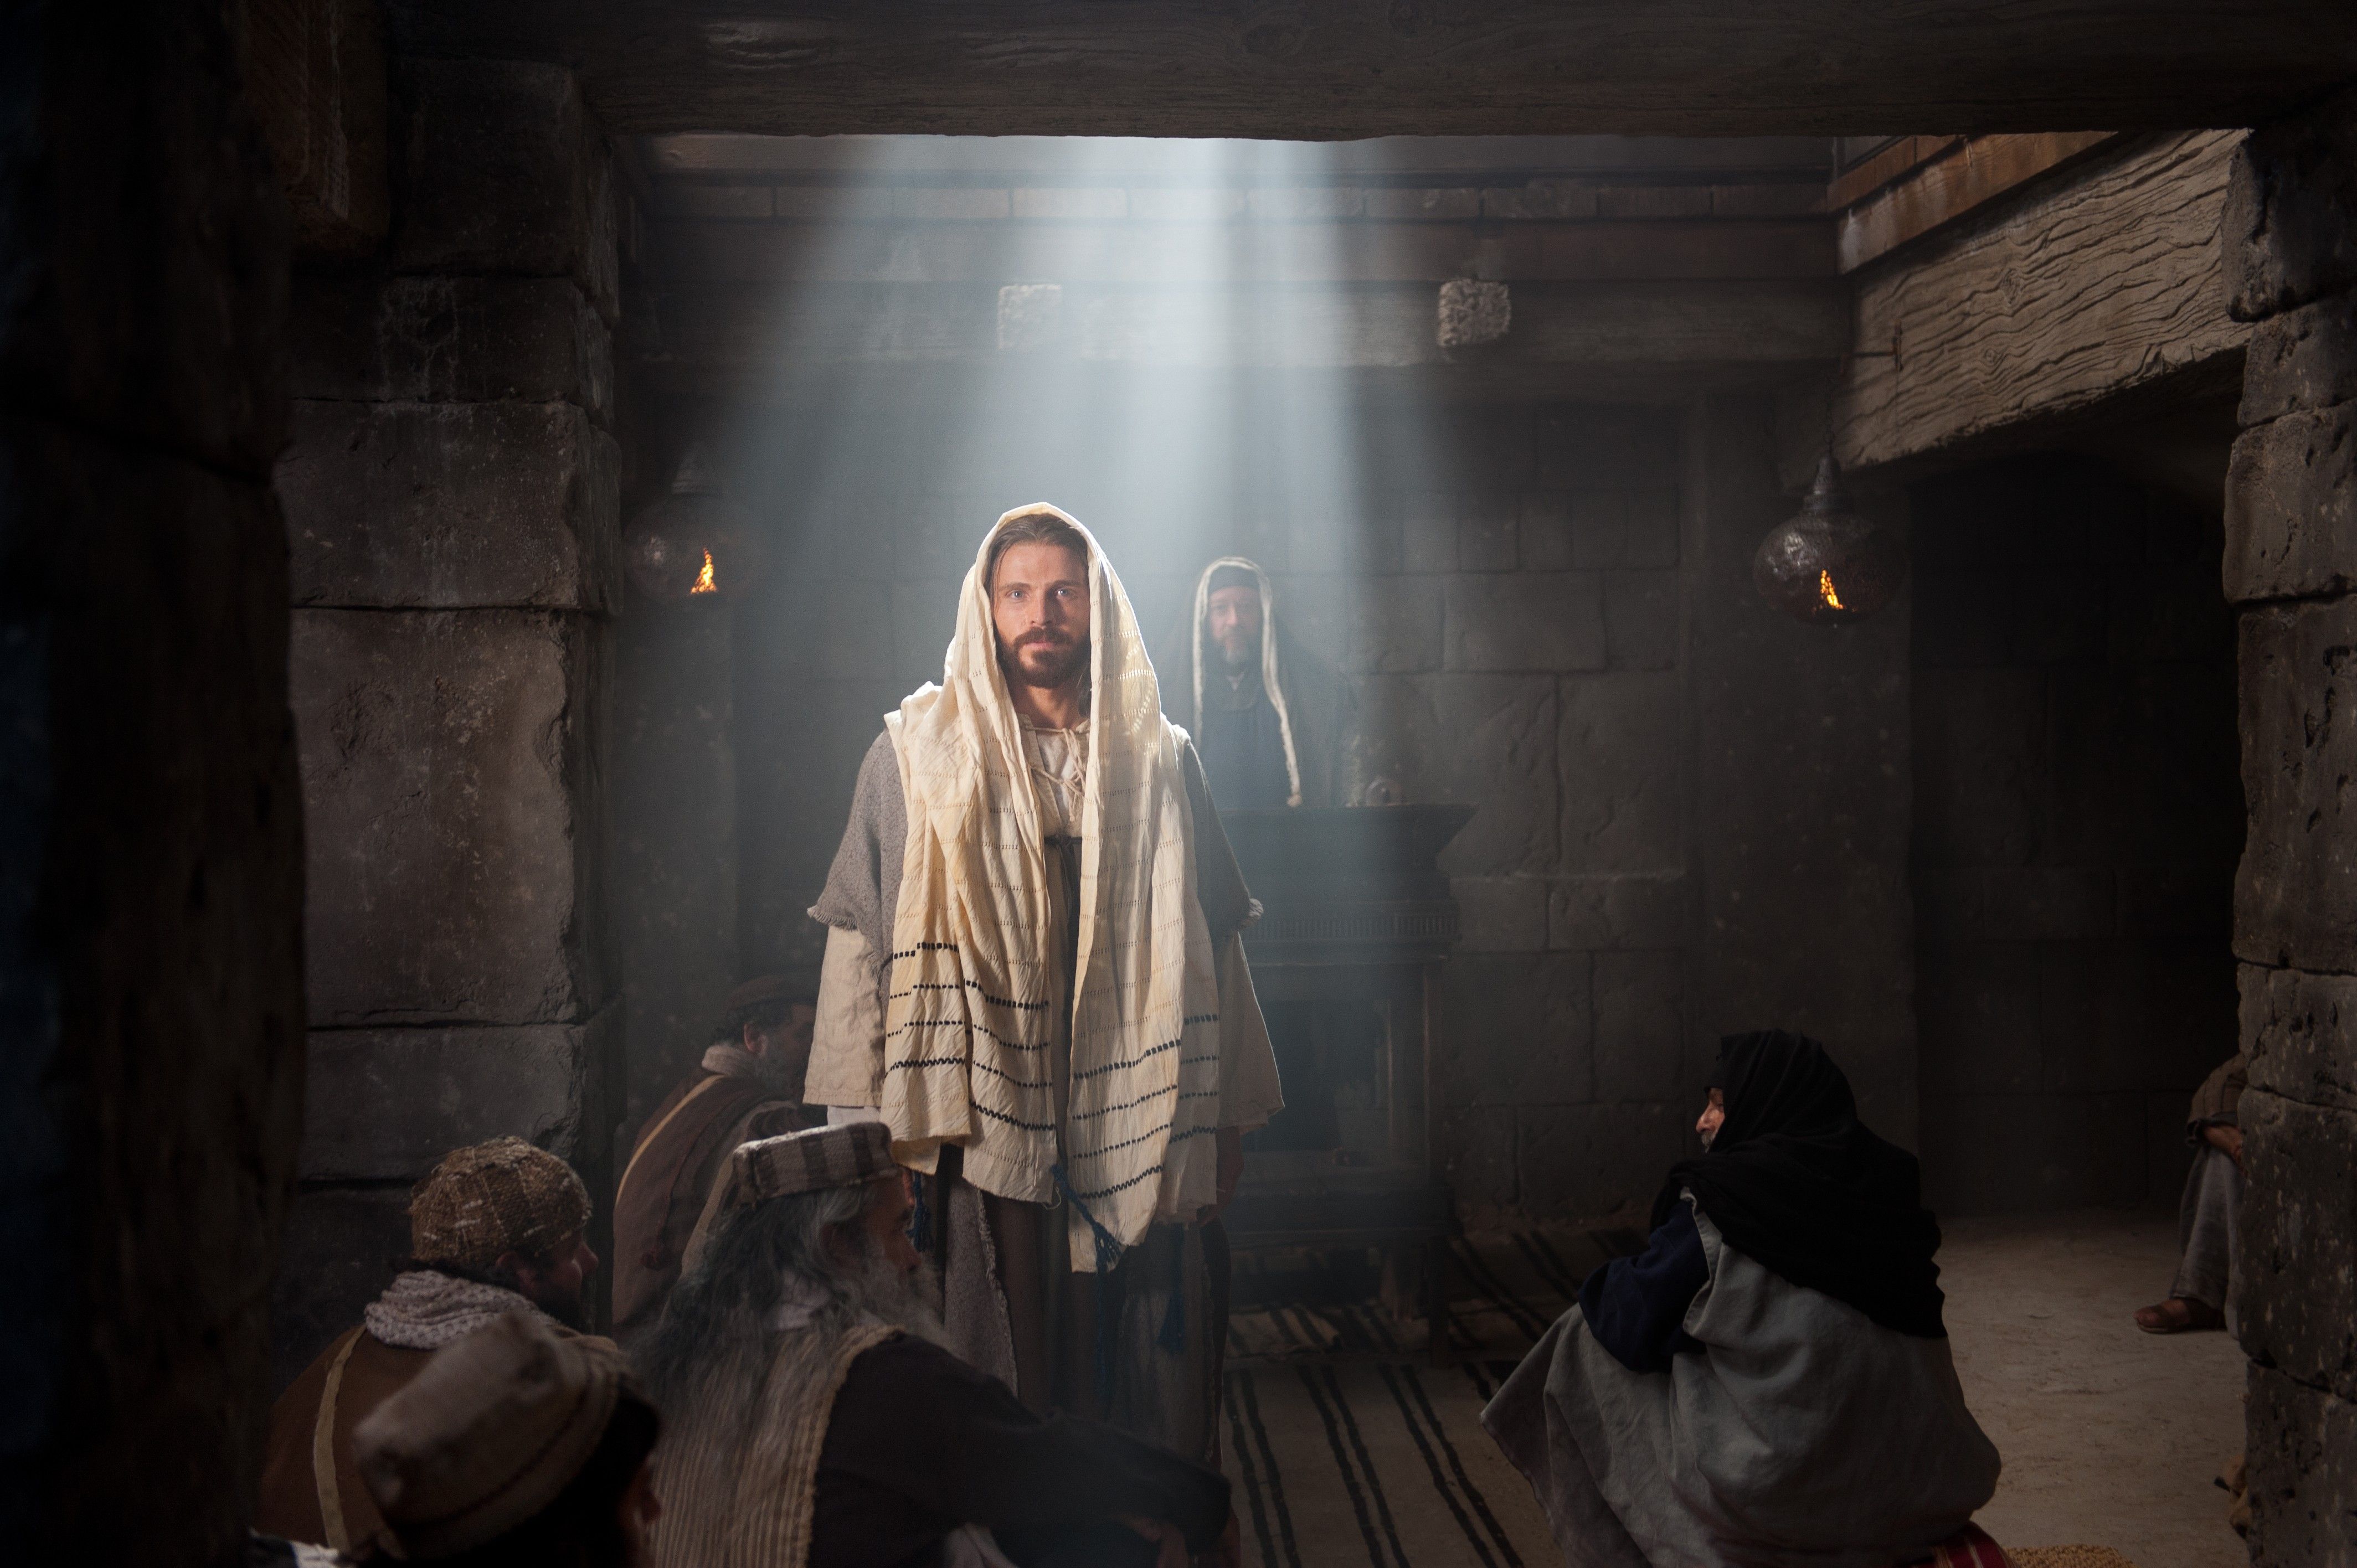 Jesus standing in the synagogue after declaring that He is the Messiah and the fulfillment of Isaiah’s prophecy.